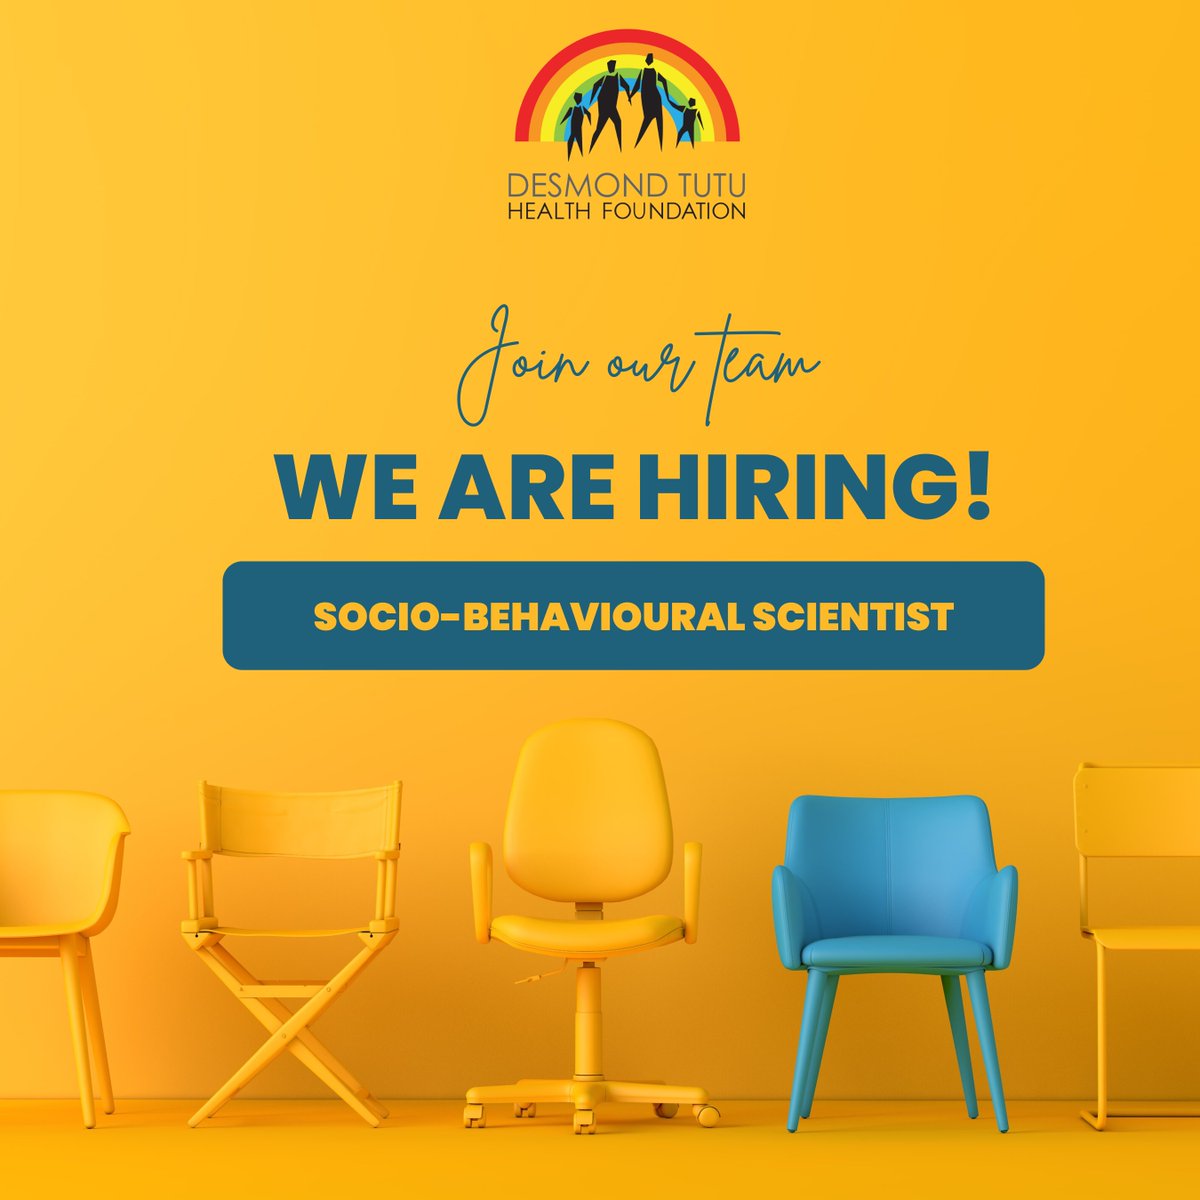 If you're ready to play a vital role in our exciting future and have experience implementing, coordinating, and monitoring research study protocols - we invite you to join our team as a Socio-Behavioural Scientist. Apply now: applybe.com/hiv-research/J… #DTHFCareers #WorkAtDTHF